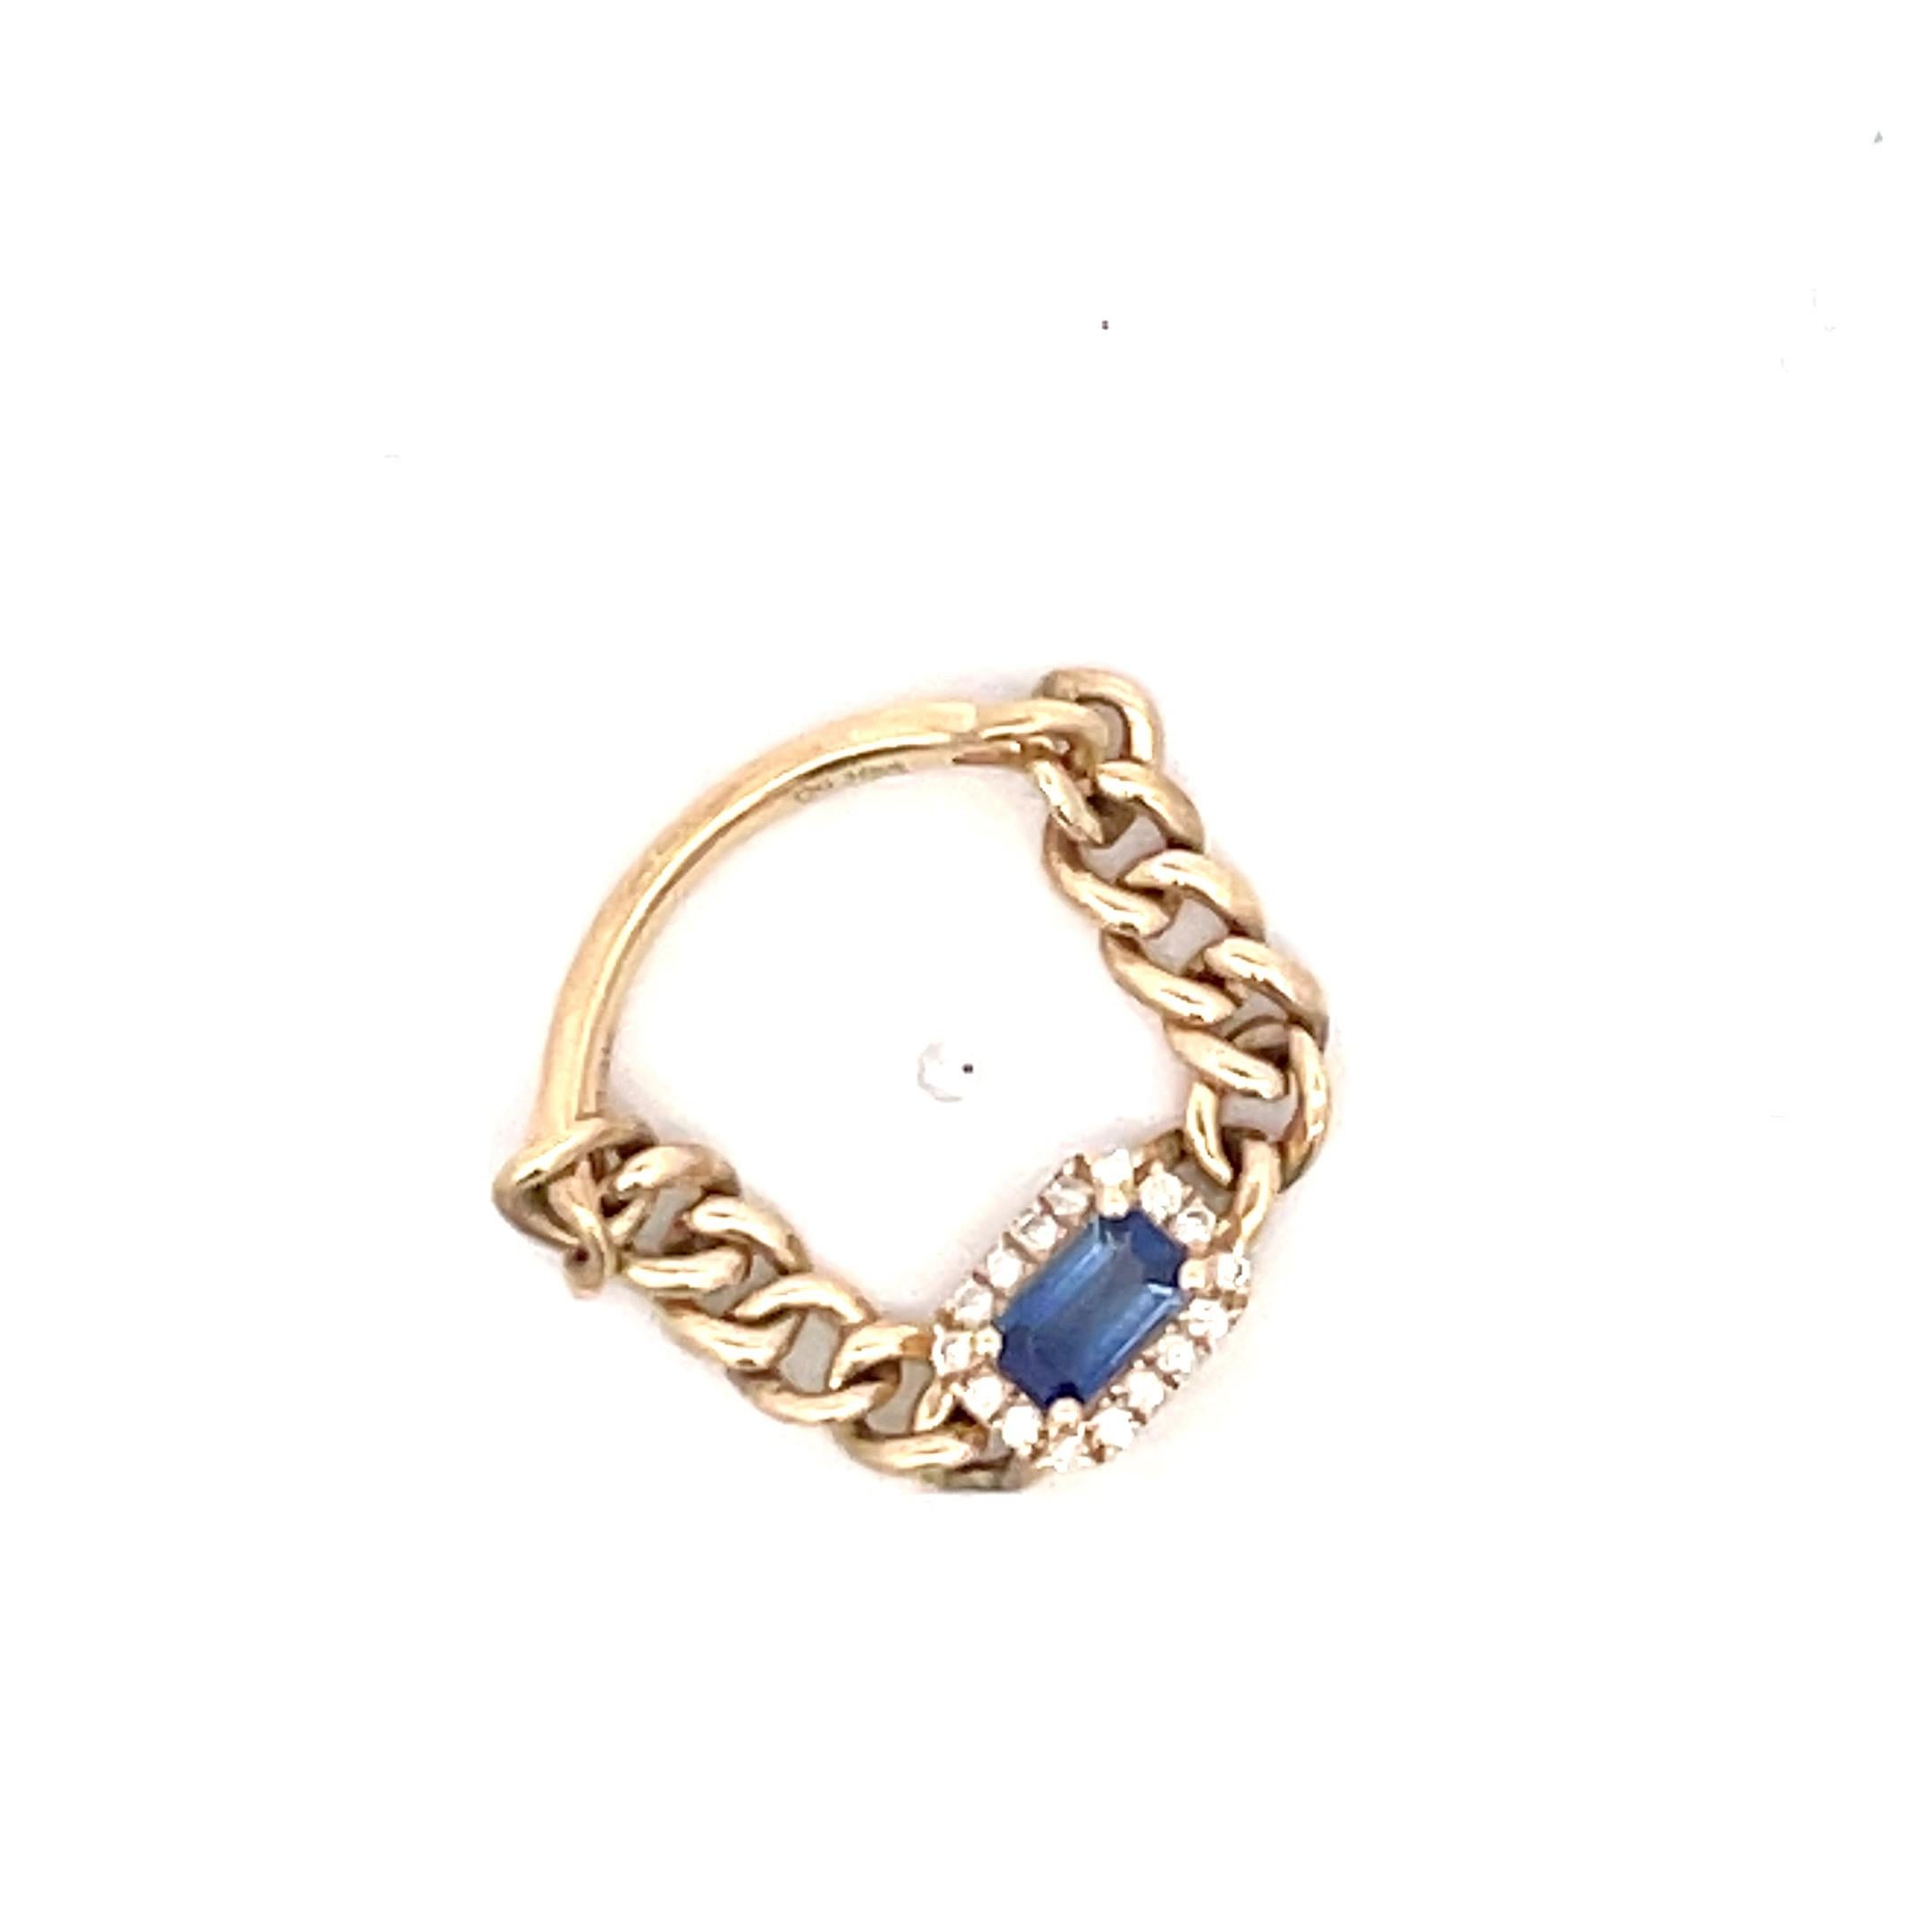 Fun & fashionable ring featuring an emerald cut blue Sapphire surround by small round brilliants on a 14 karat yellow gold Cuban link chain ring. 
Sapphire 0.15 Carats